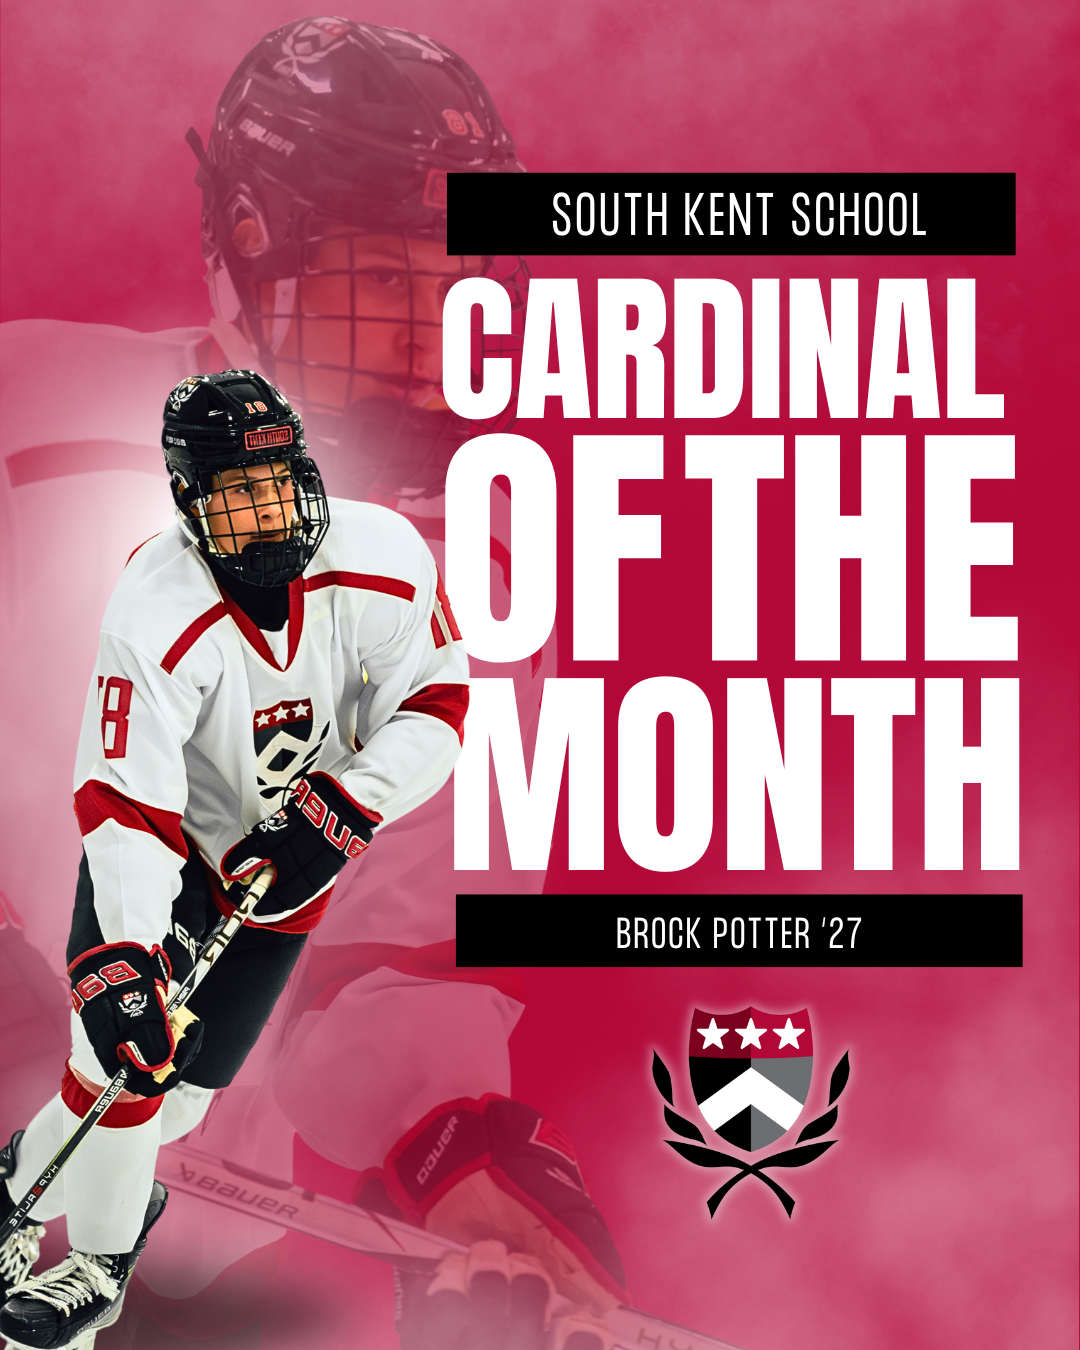 South Kent Nominates Brock Potter as First Cardinal of the Month Winner